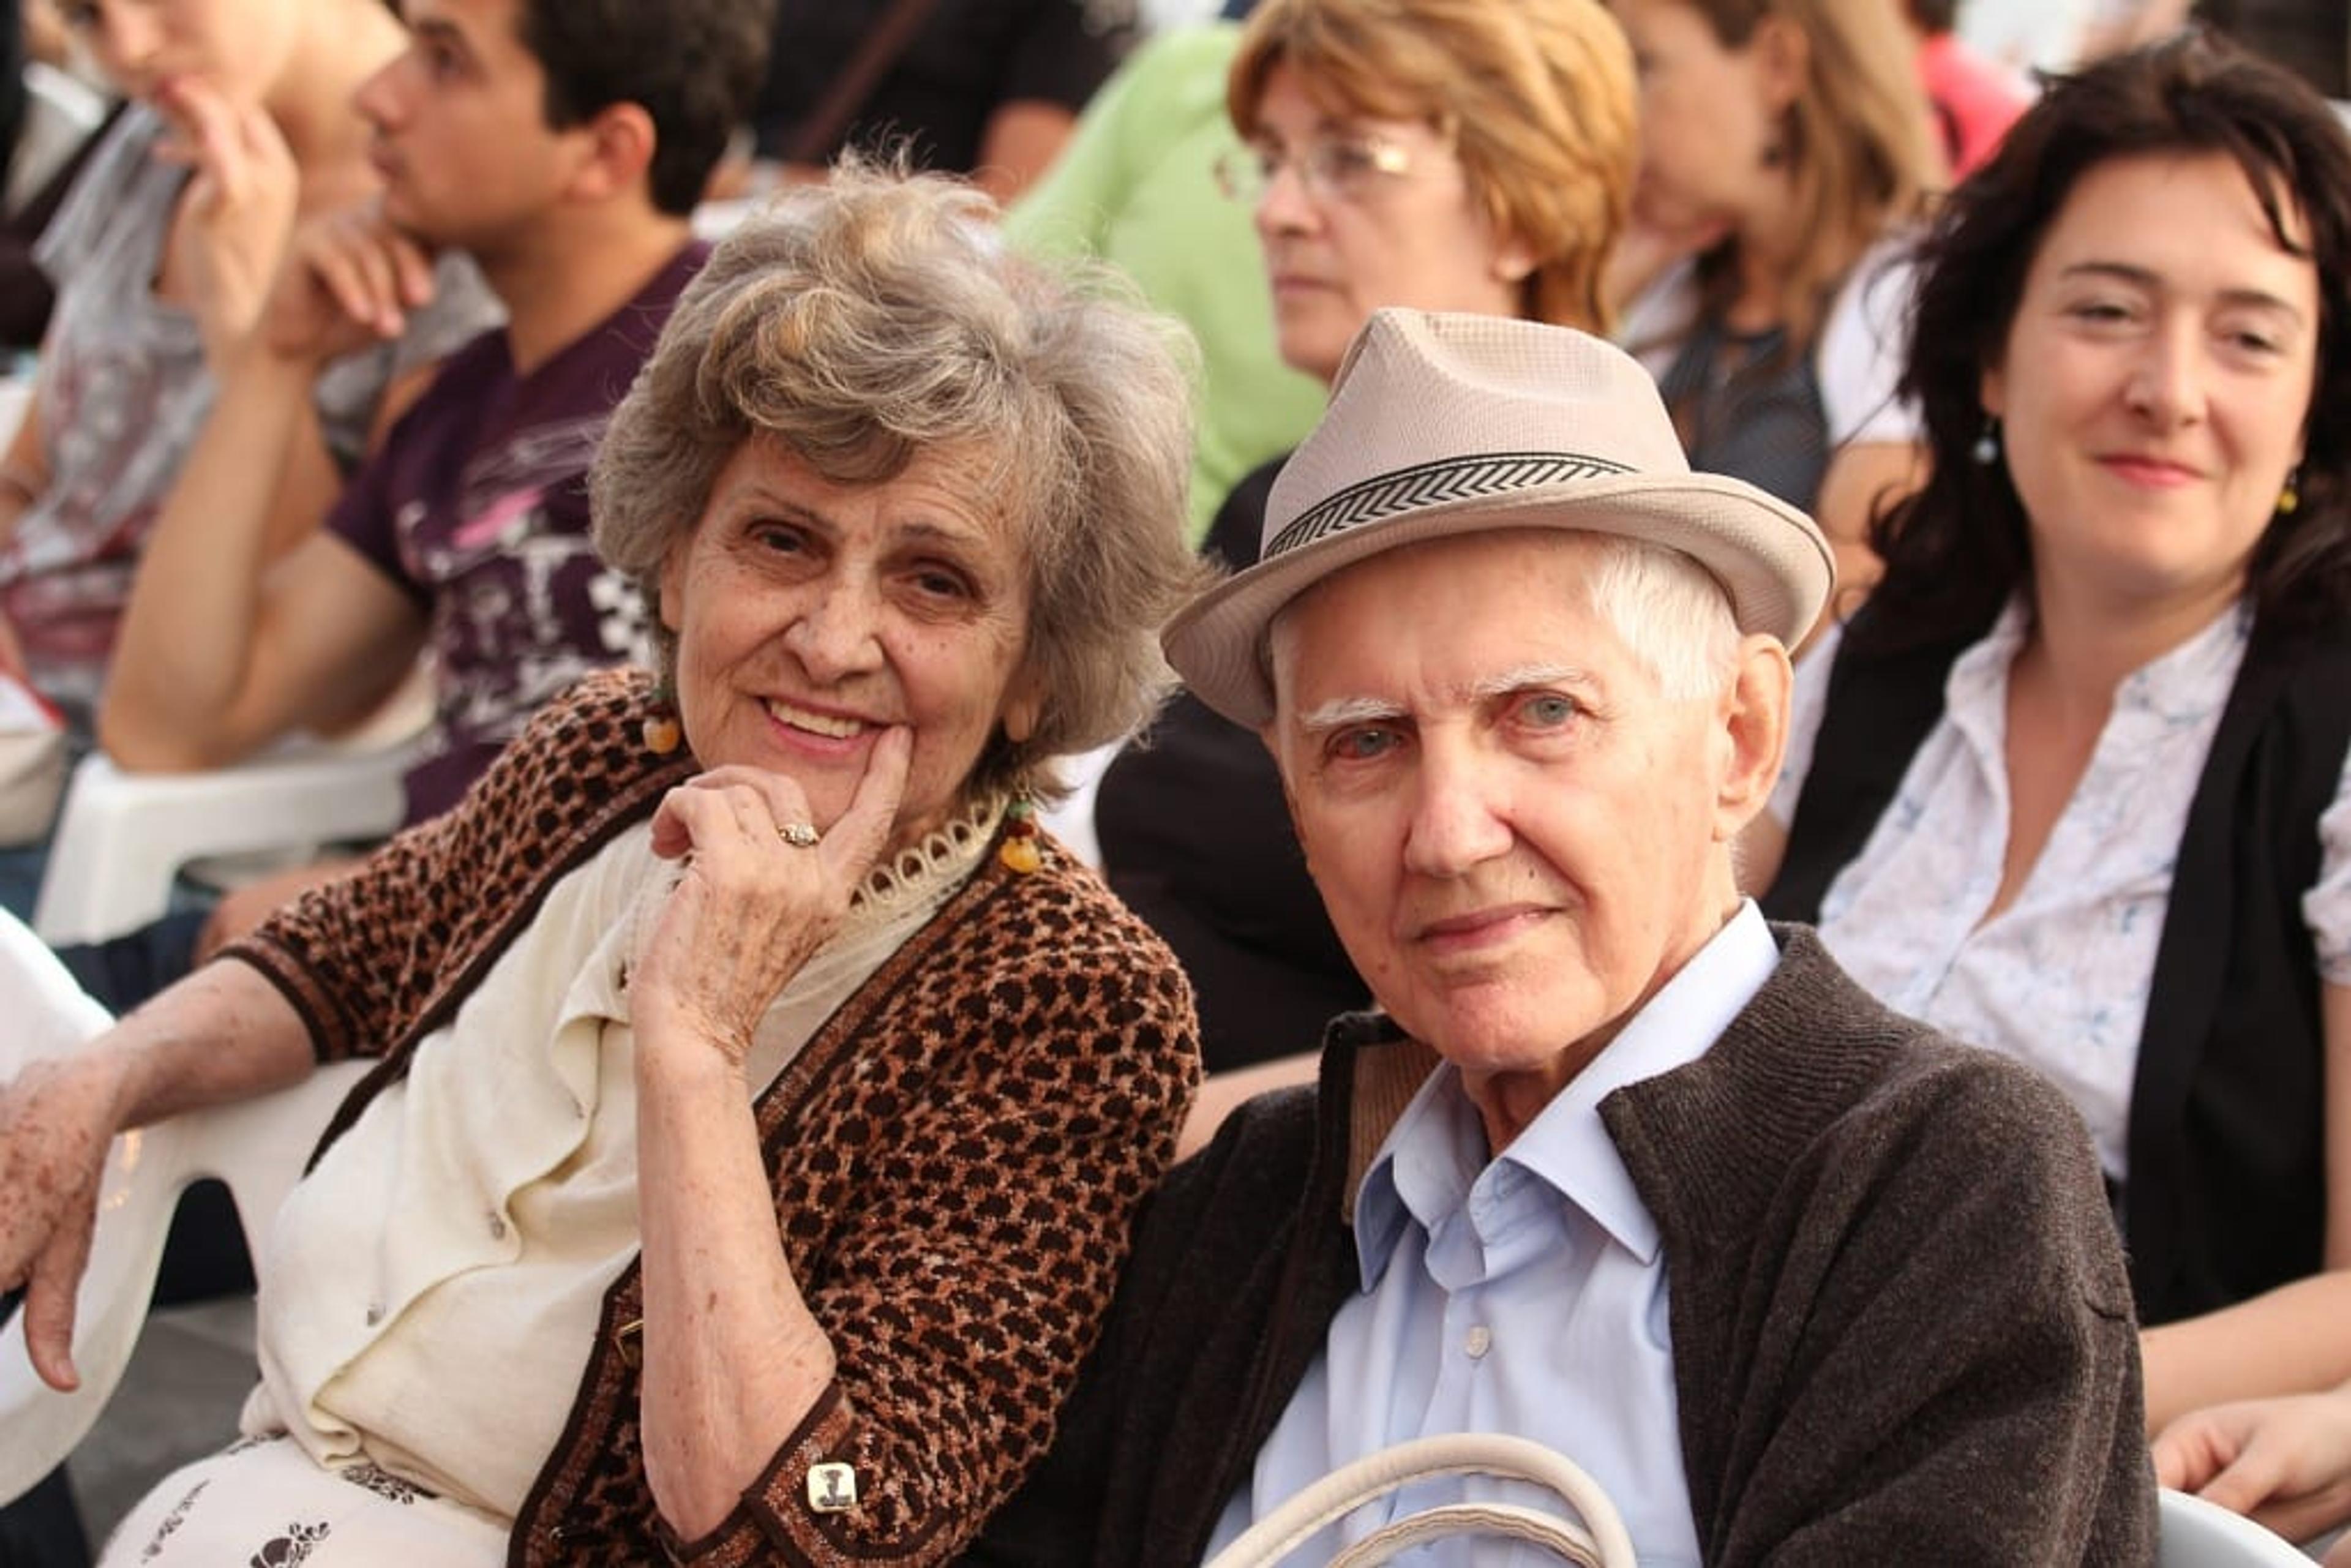 An older man and woman looking at the camera